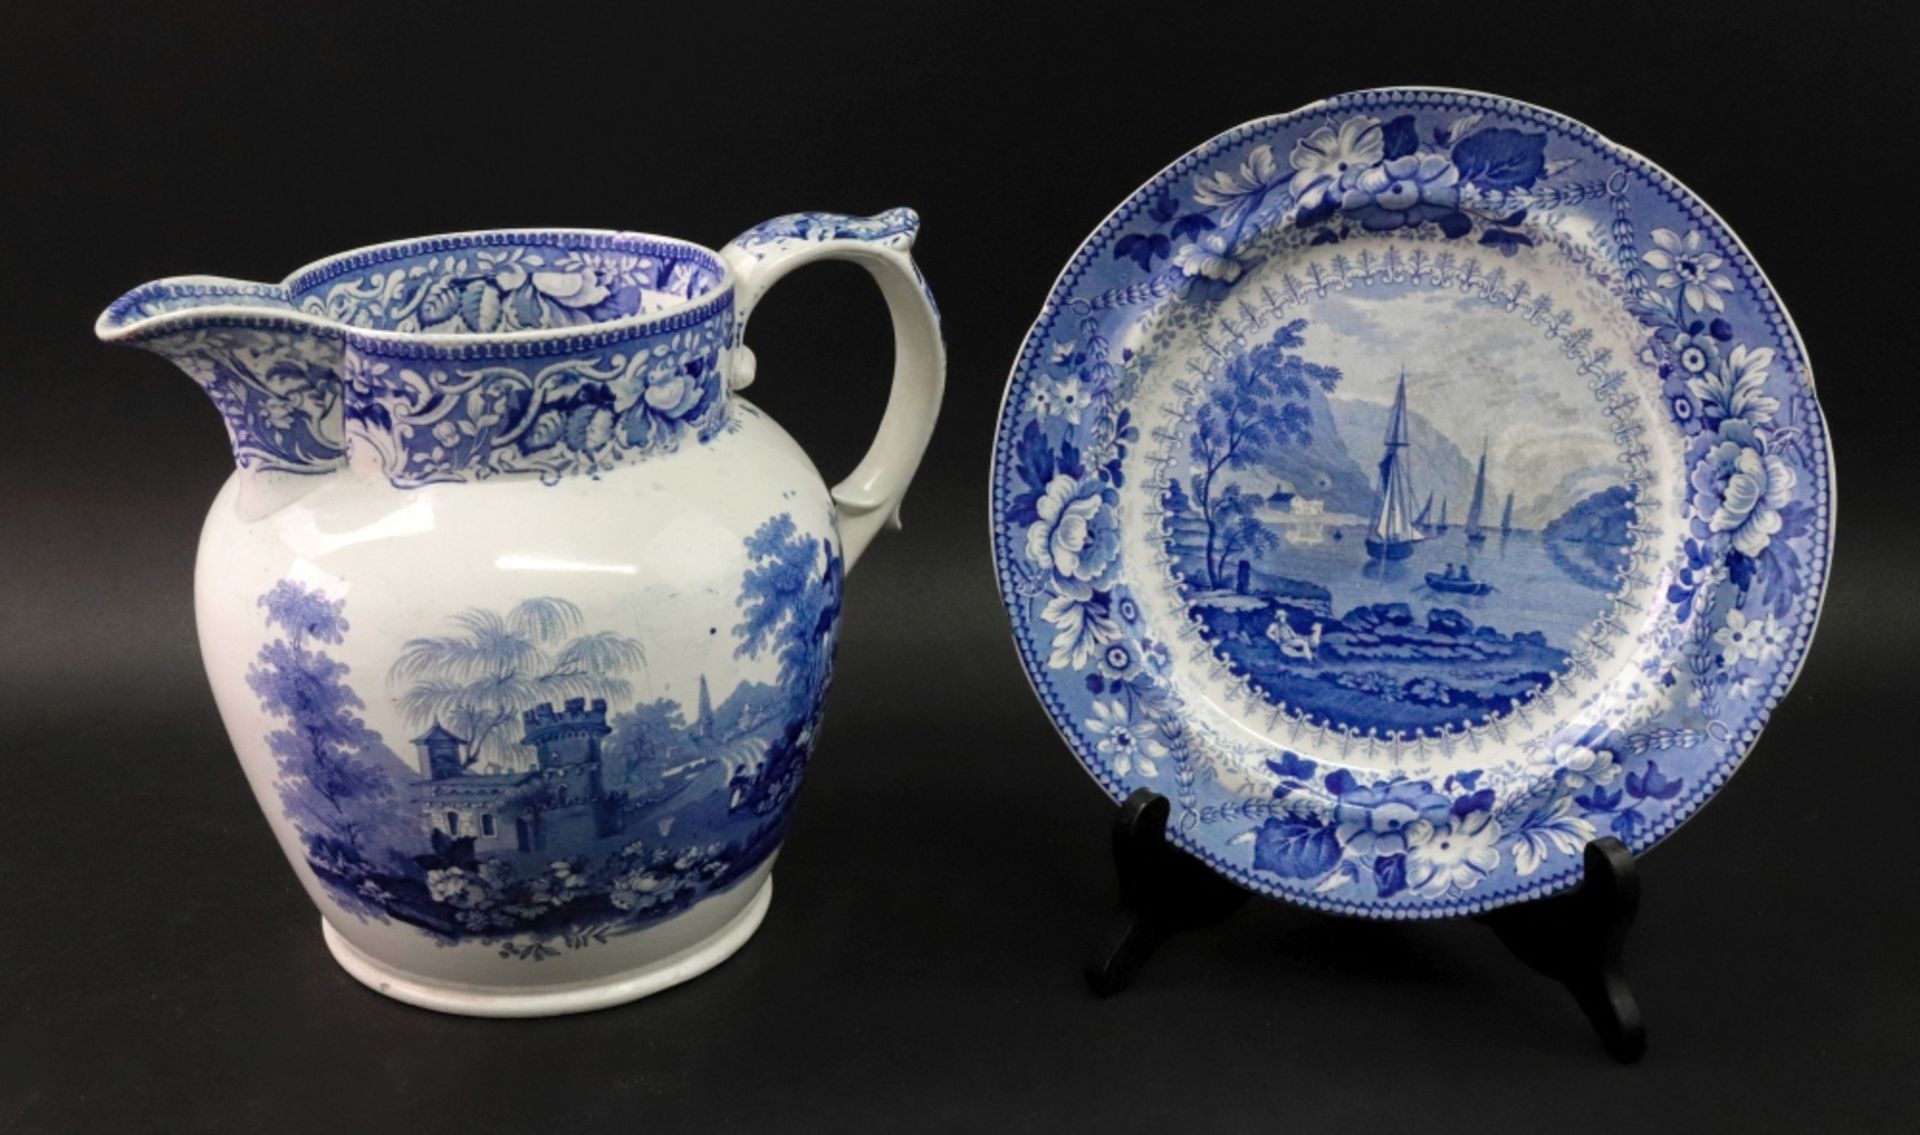 A large Staffordshire pearlware baluster shape jug, early 19th century, transfer printed in blue,